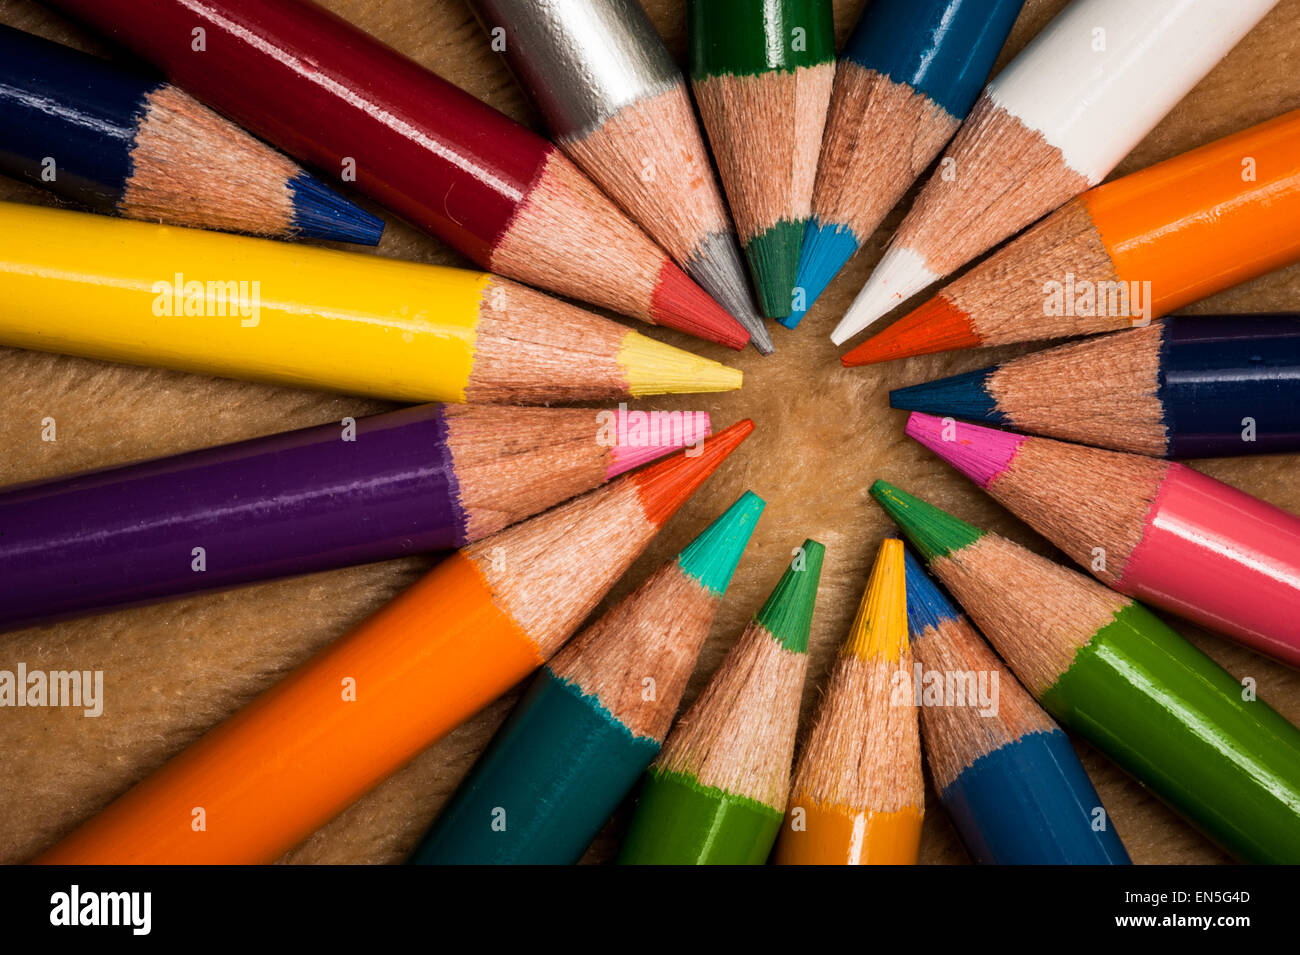 Colorful wooden pencils Stock Photo